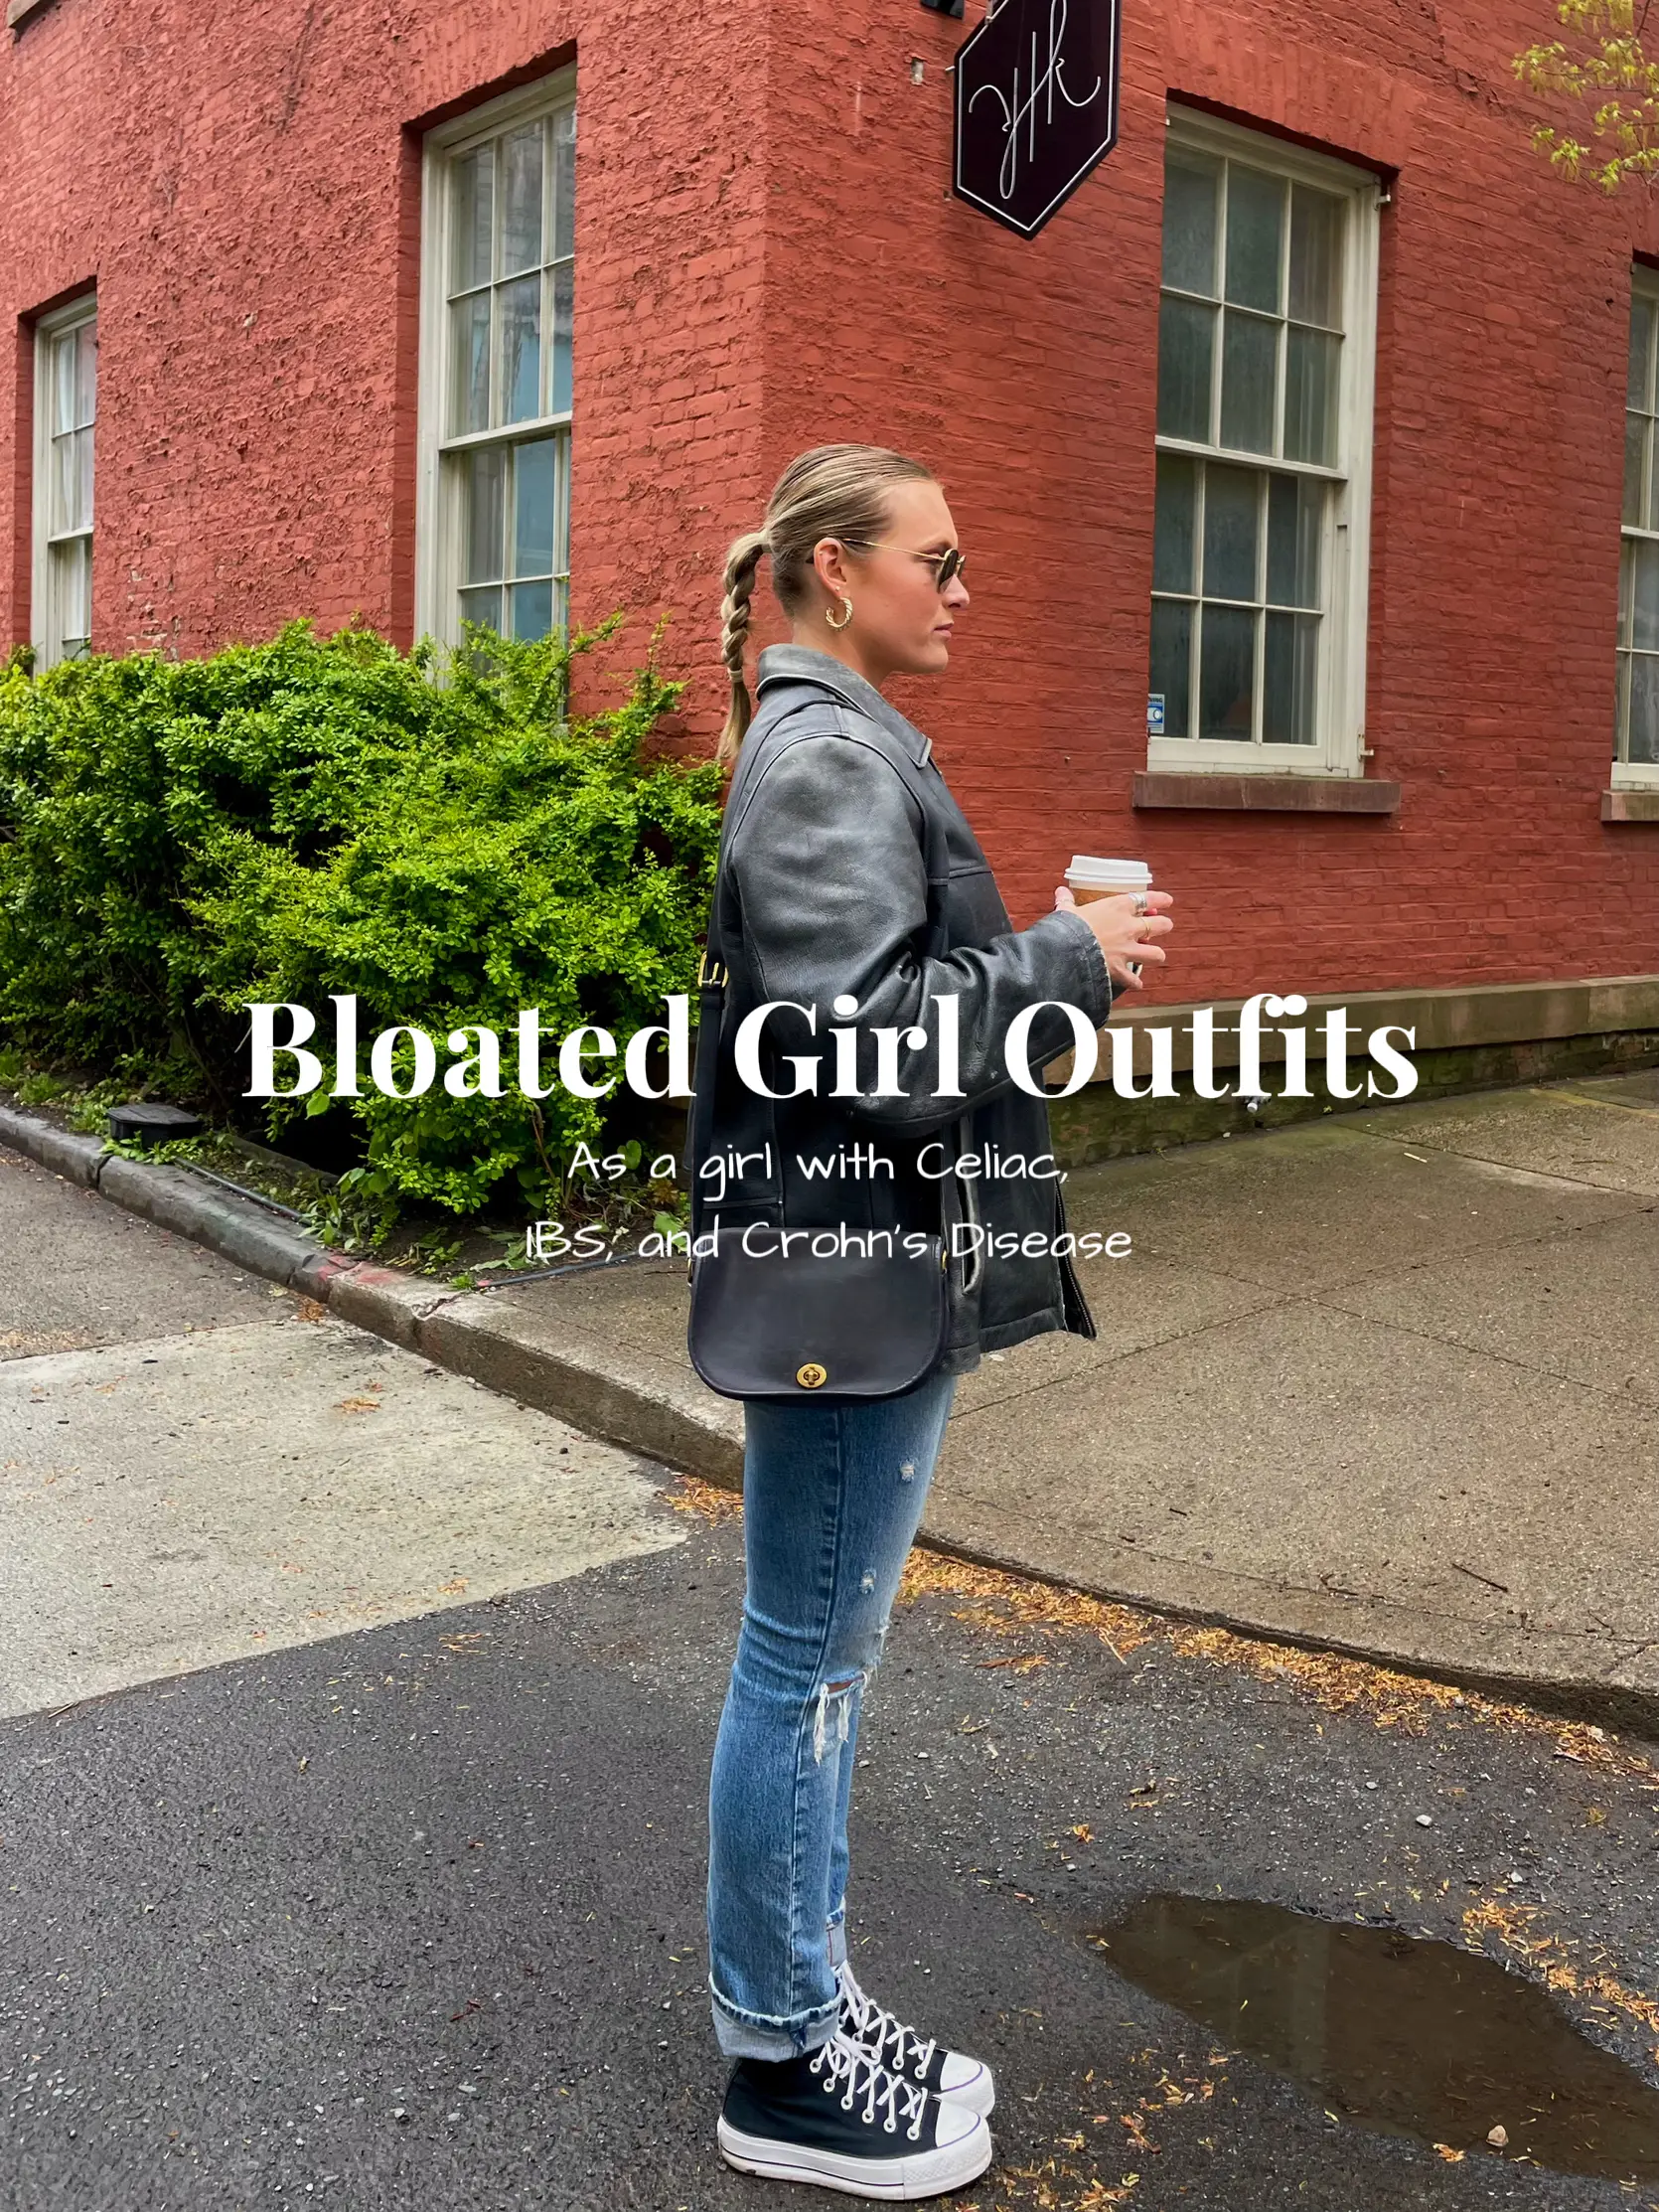 My “I'm bloated, but fashionable” look, Gallery posted by lauren